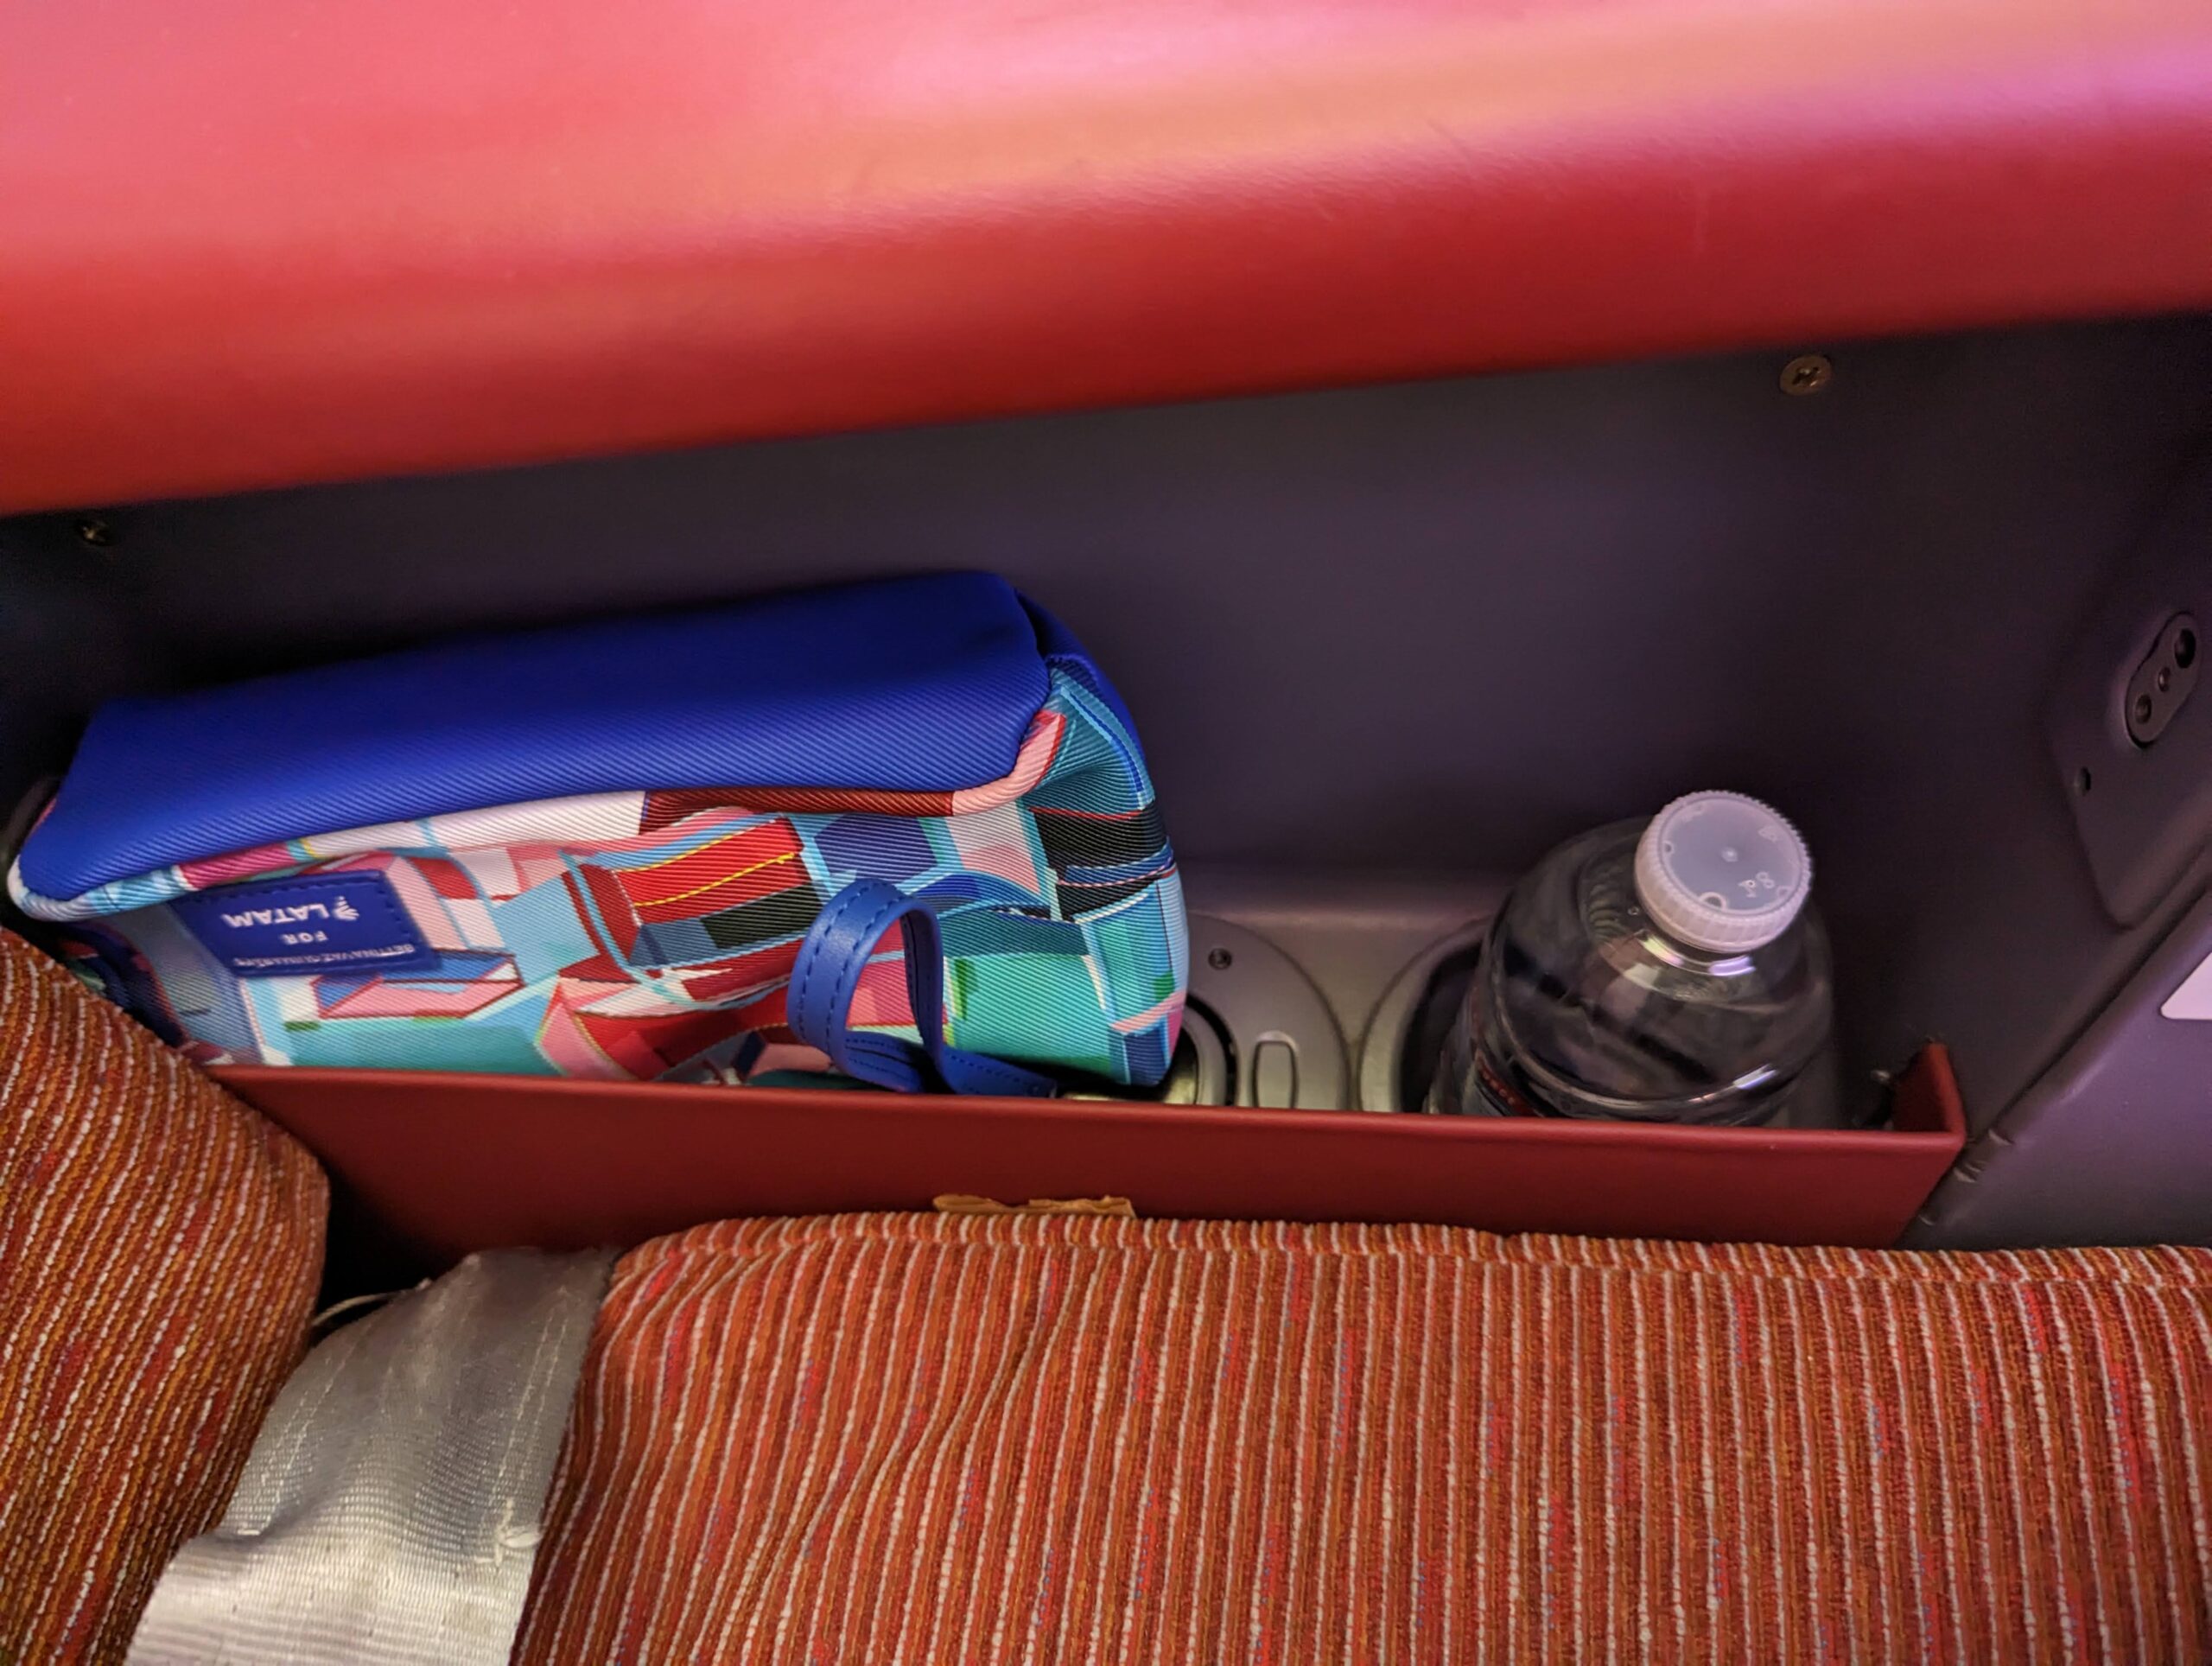 a blue and red bag in a red seat